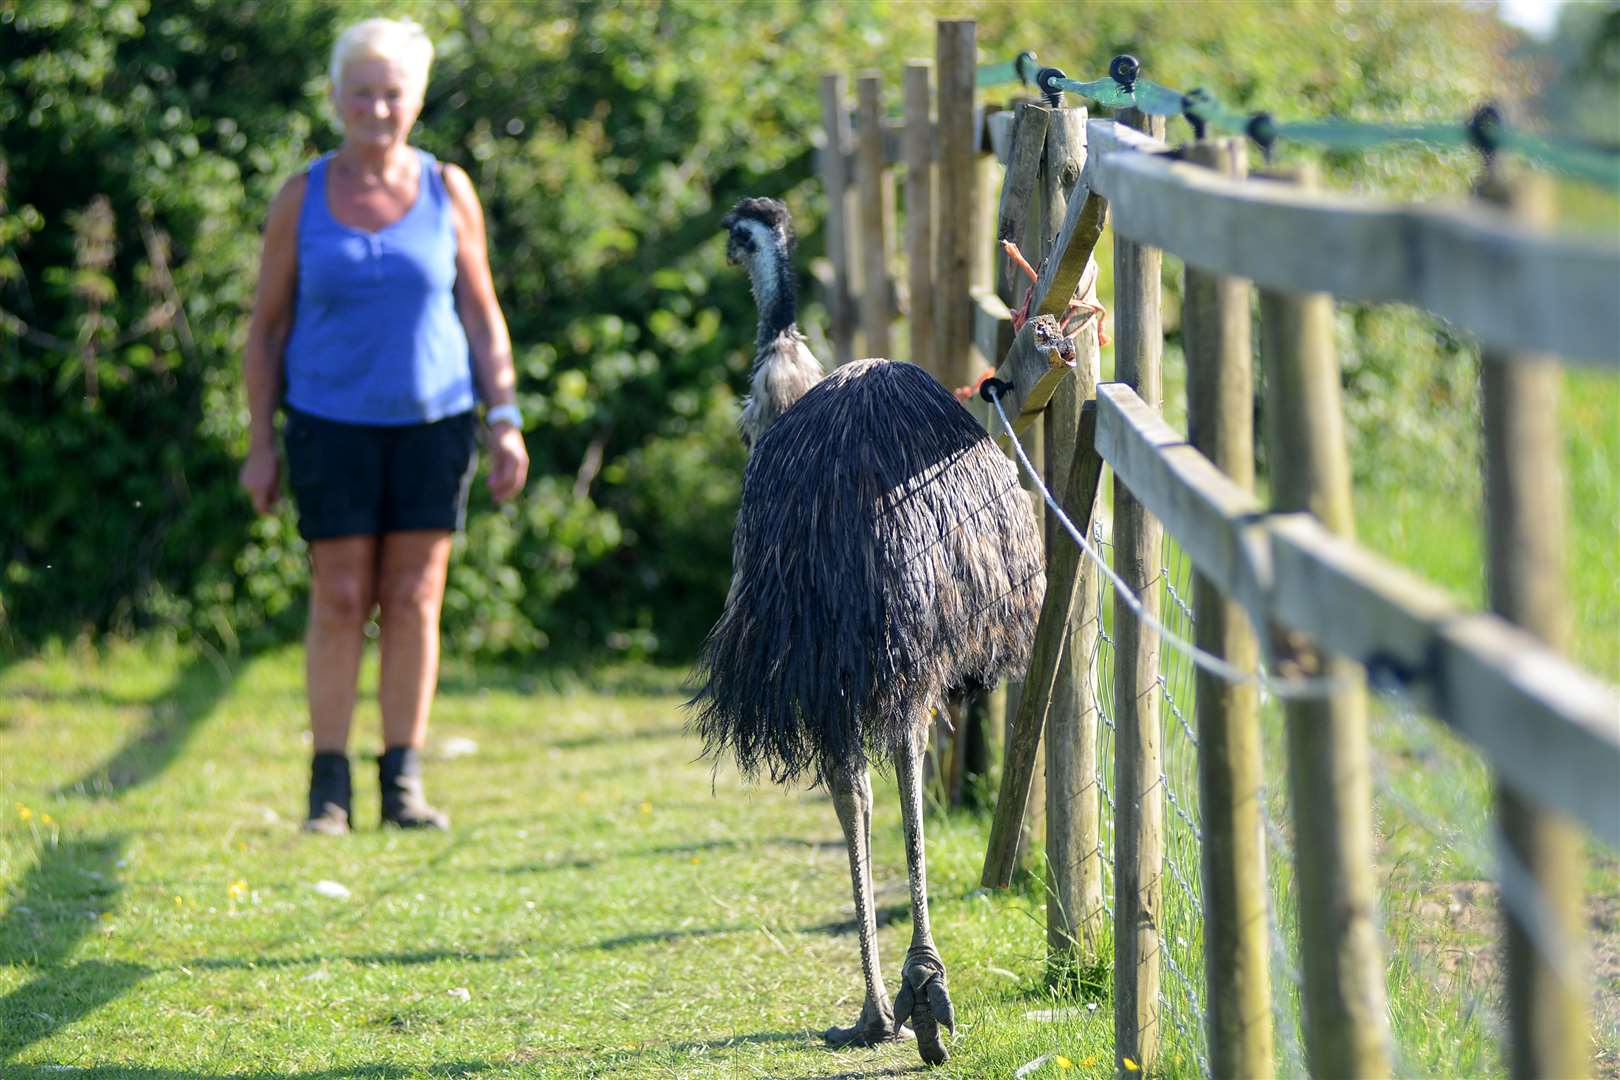 Farm owner Nan Fraser gets to know the emu who arrived at her property in Shadoxhurst